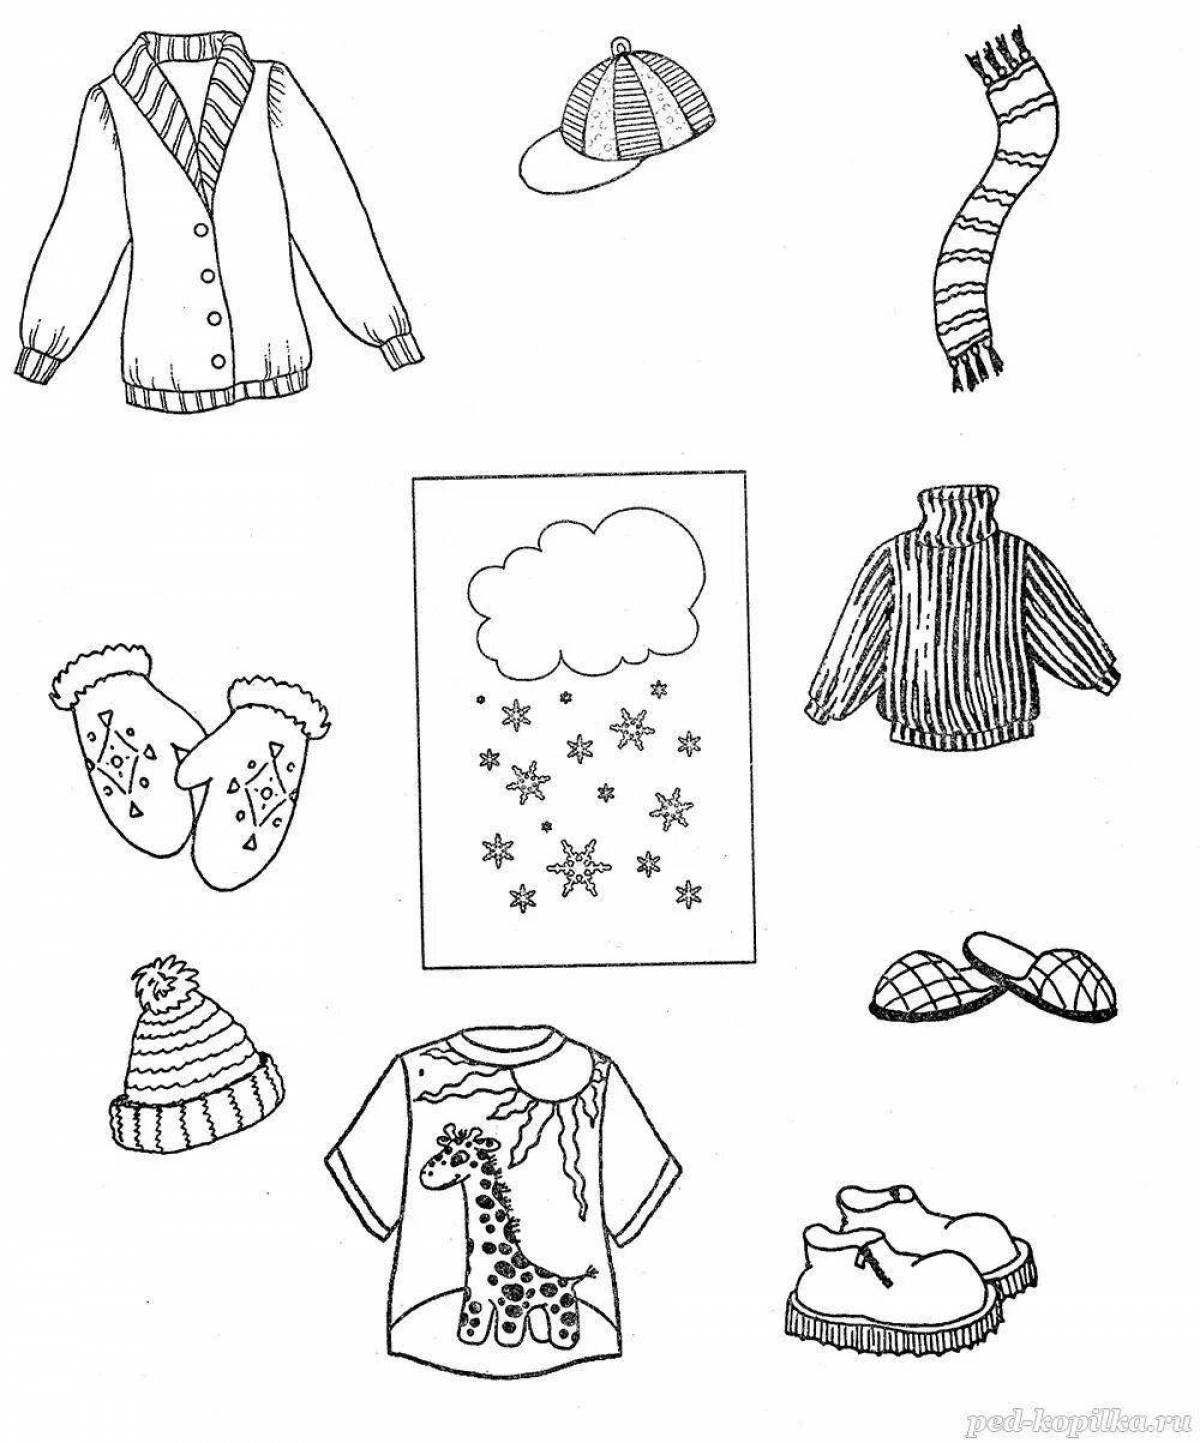 Live coloring of winter clothes for children 4-5 years old